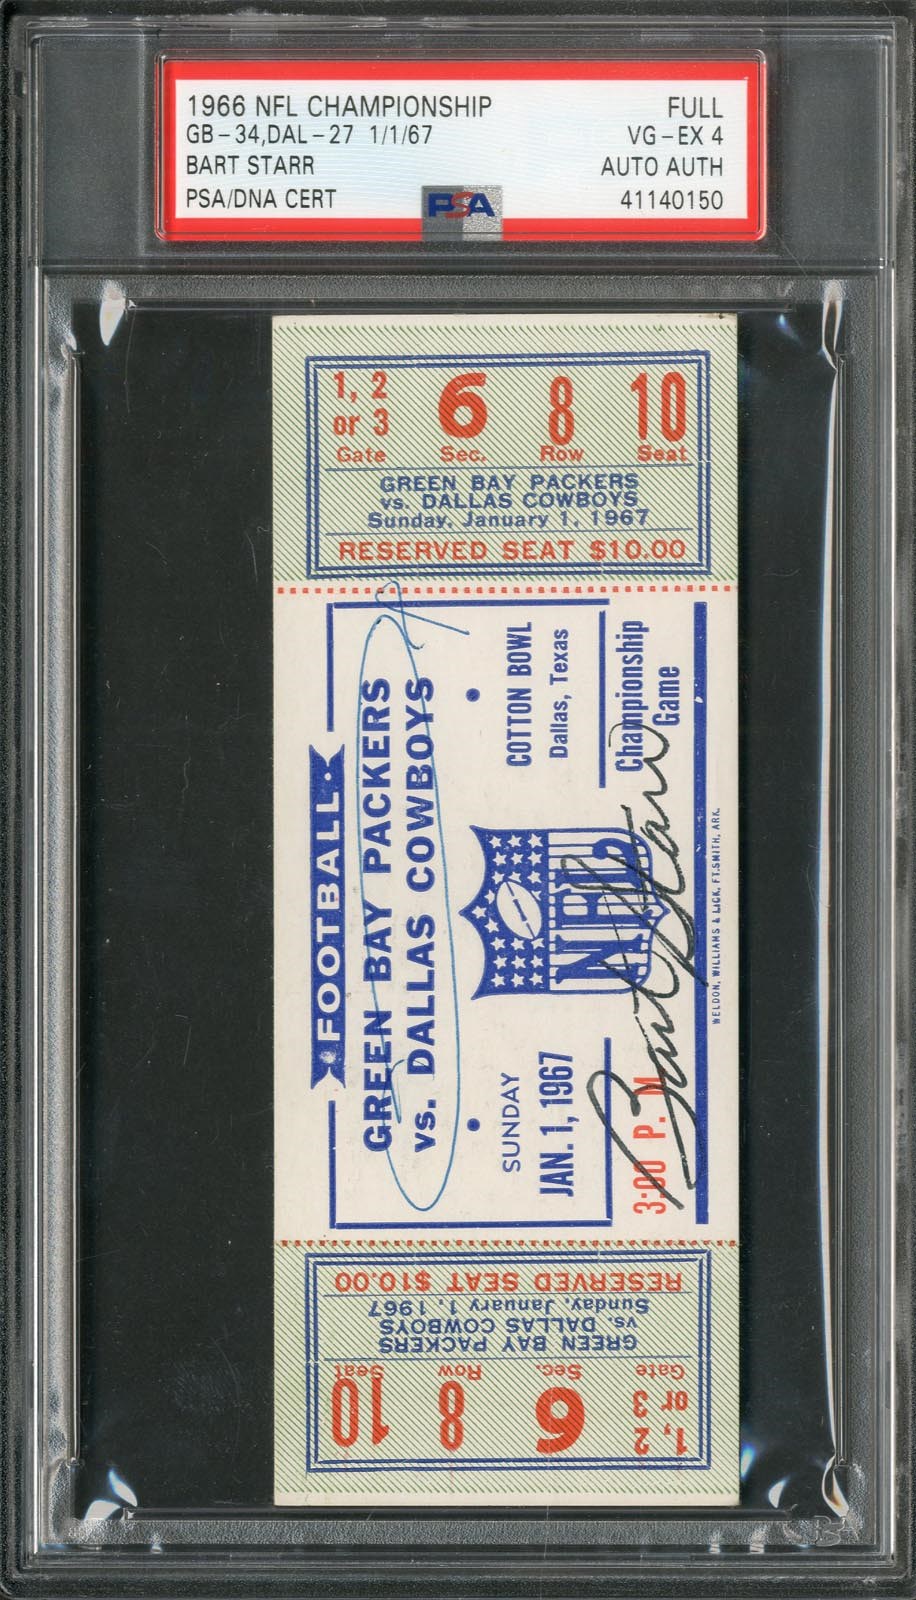 Football - 1966 NFL Championship Full Ticket Signed by Bart Starr (PSA)